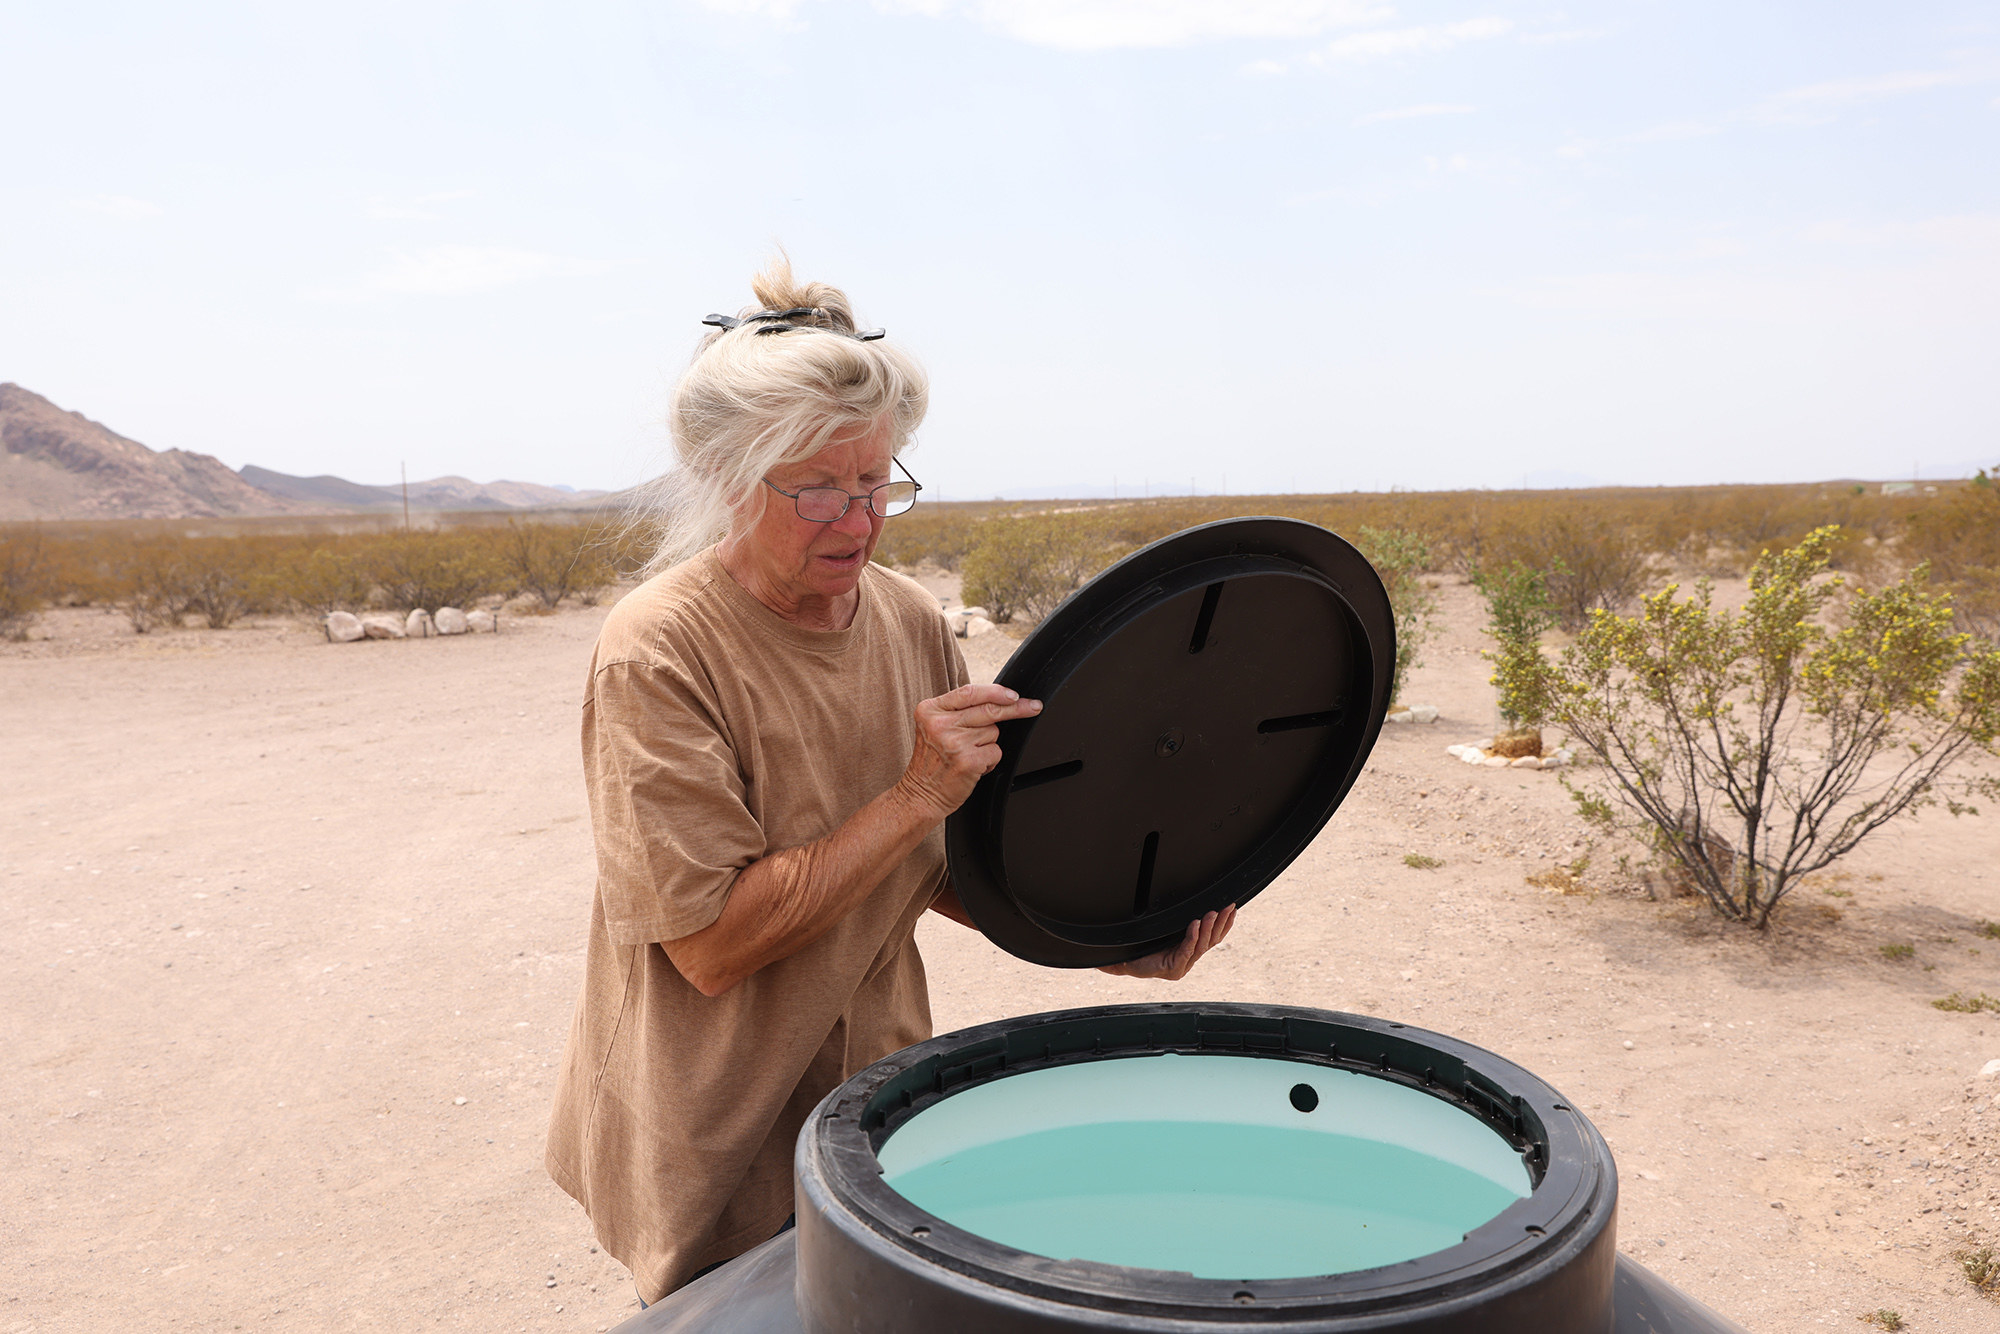 A woman with white hair in a T-shirt looks into a water well in a dry desert landscape